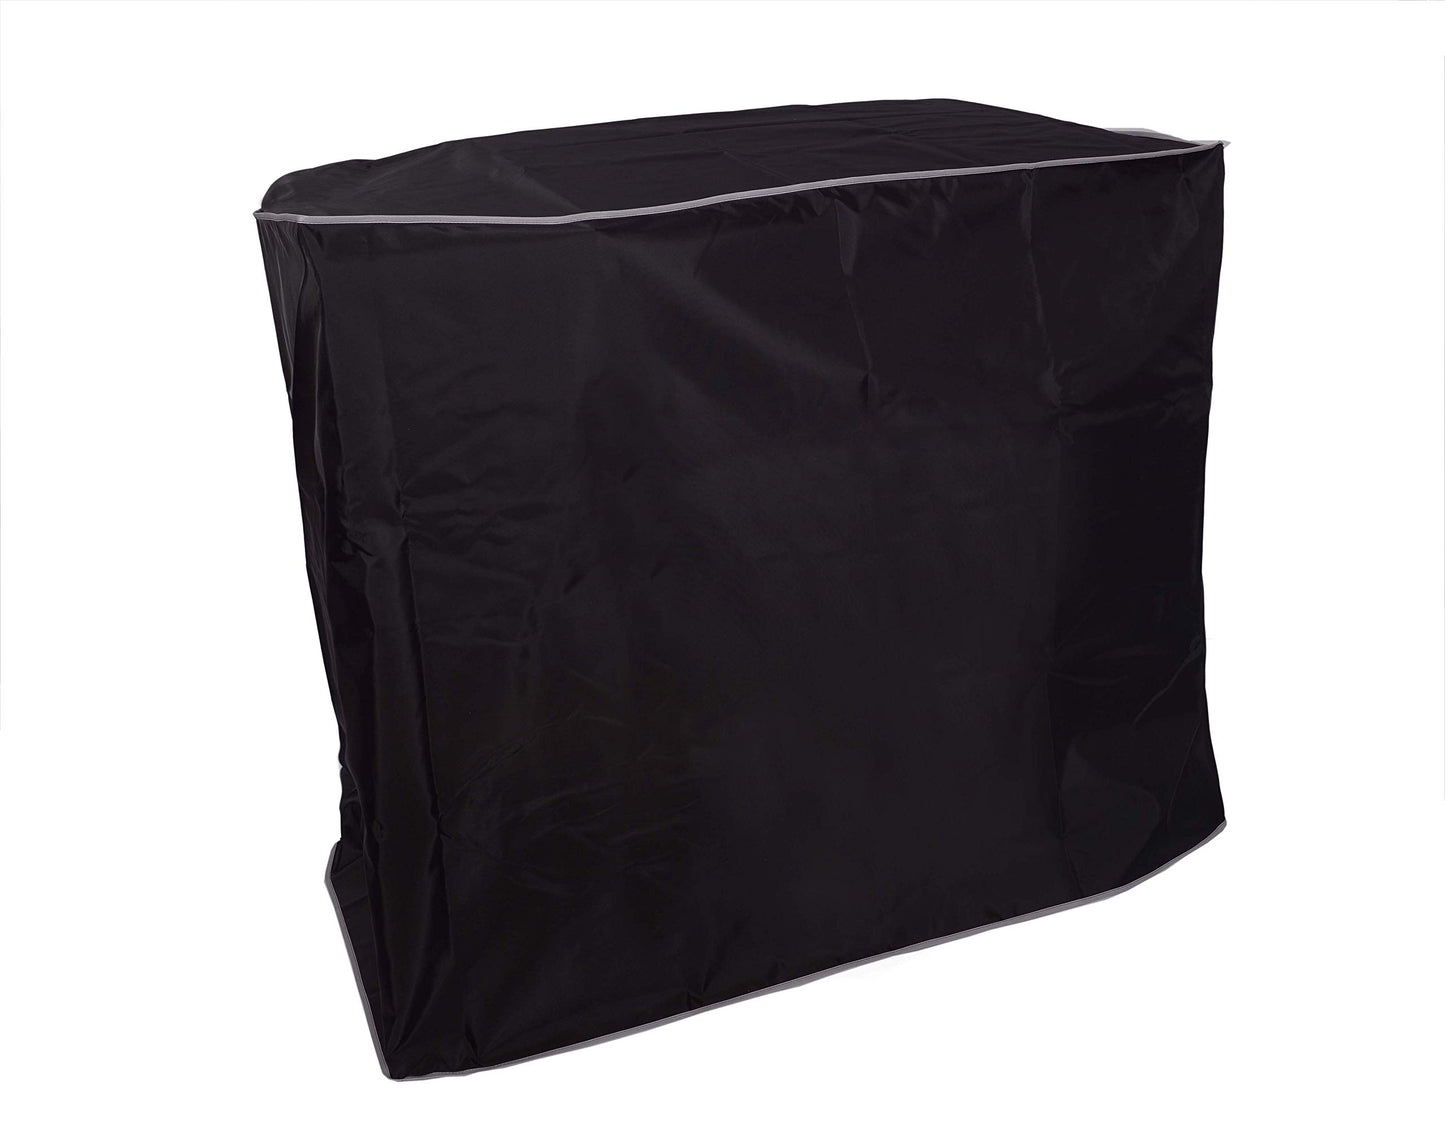 The Perfect Dust Cover, Black Nylon Cover for Epson SureColor P10000 44'' Standard Edition Printer, Anti Static and Waterproof Cover Dimensions 74''W x 38.6''D x 45''H by The Perfect Dust Cover LLC